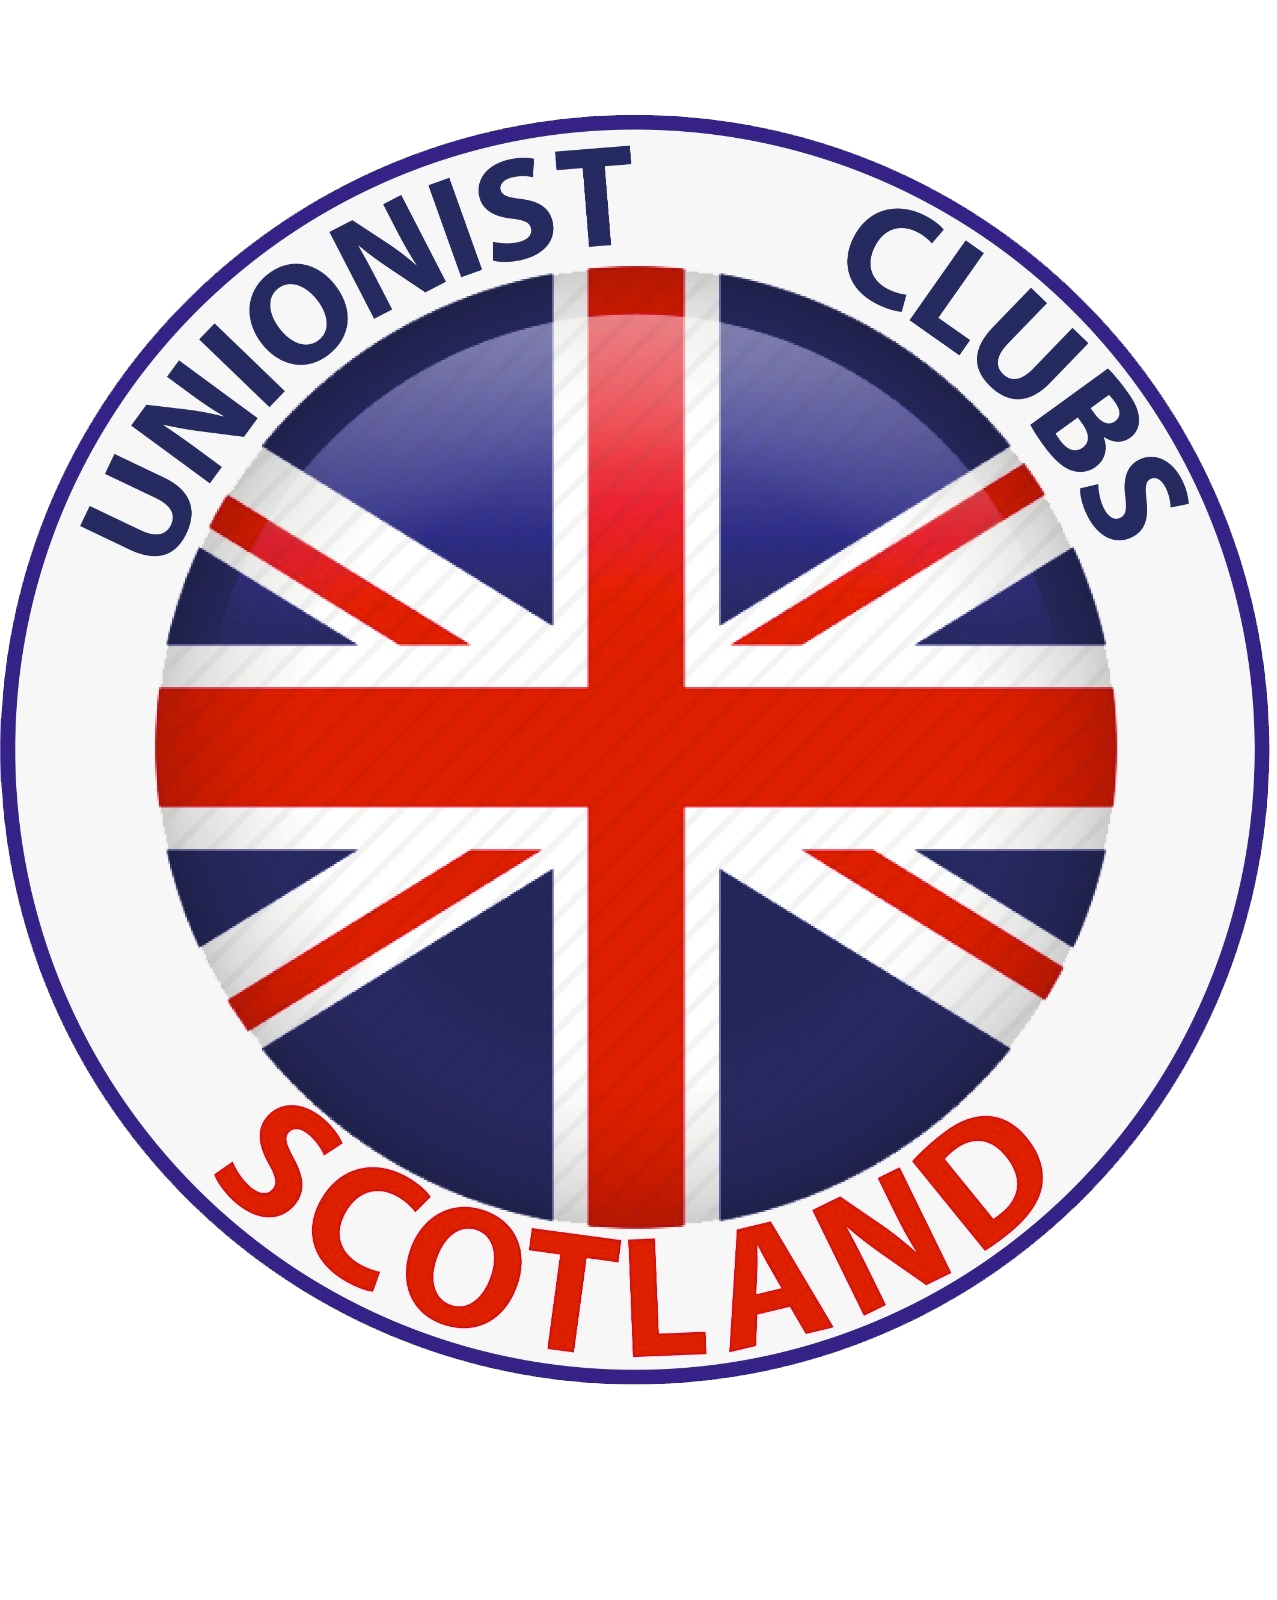 Unionist Clubs